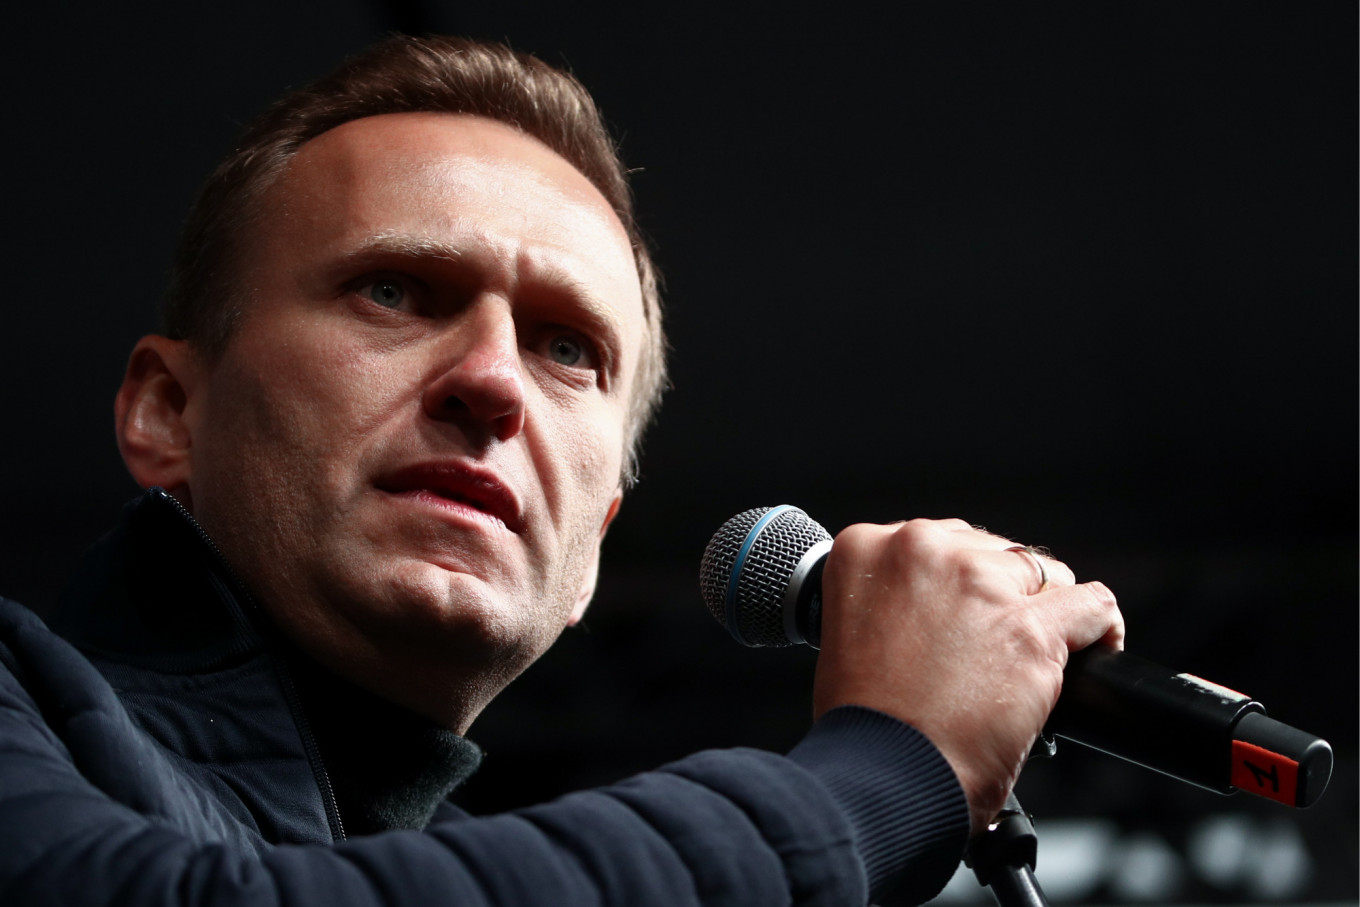 Kremlin Critic Navalny and Allies Hit With $1.4M Lawsuit Payout